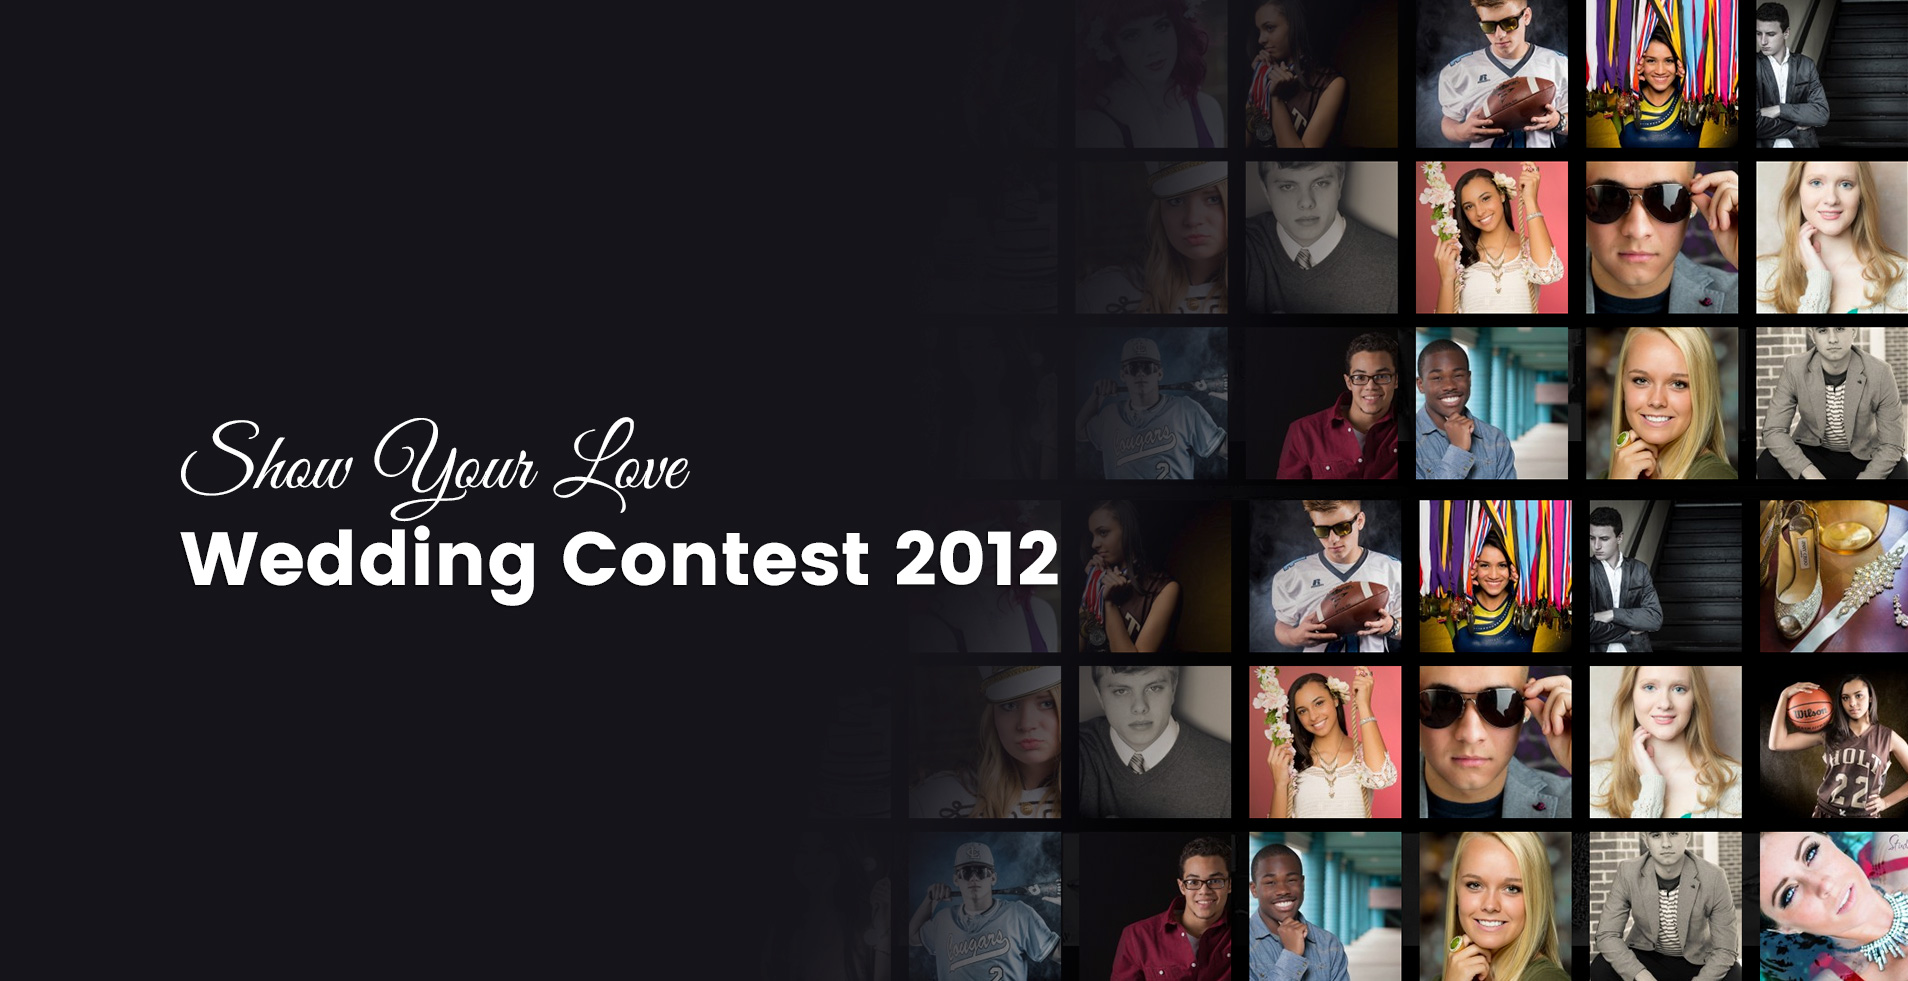 Show Your Love - Wedding Contest 2012